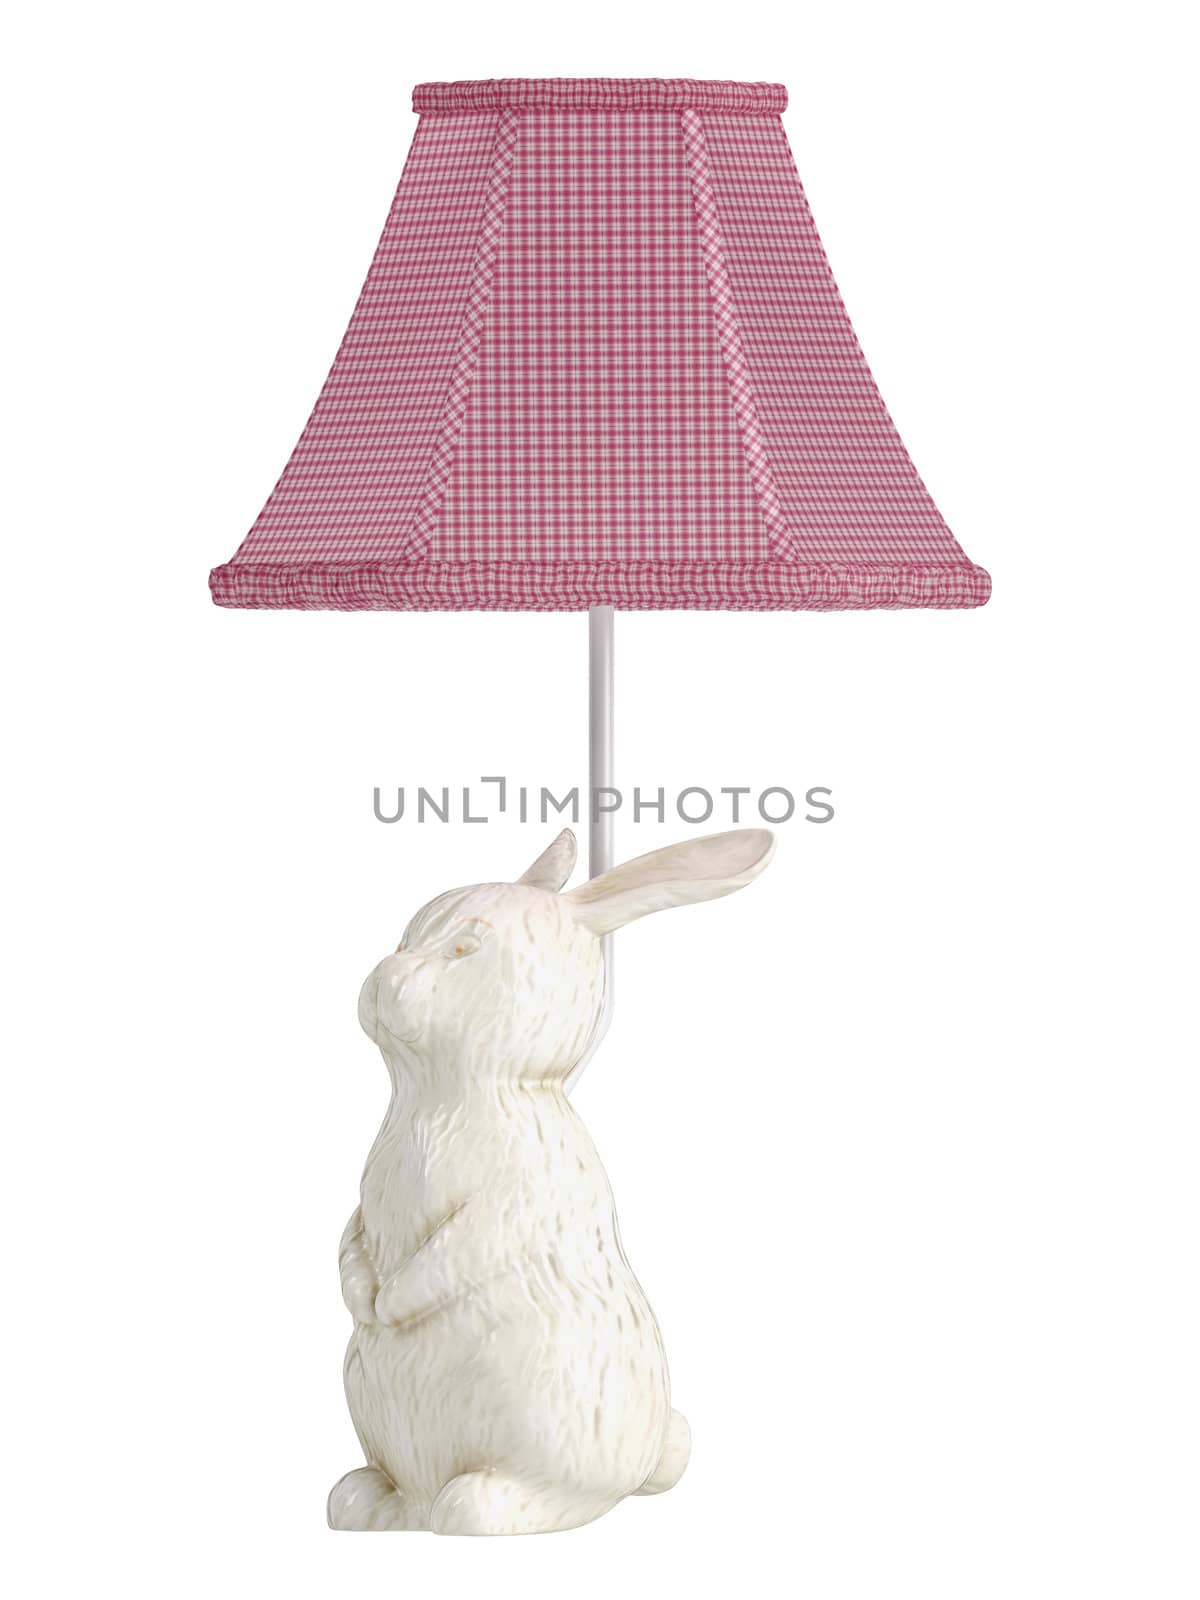 Ceramic bunny rabbit lamp with a pretty checked hexagonal shade isolated on white